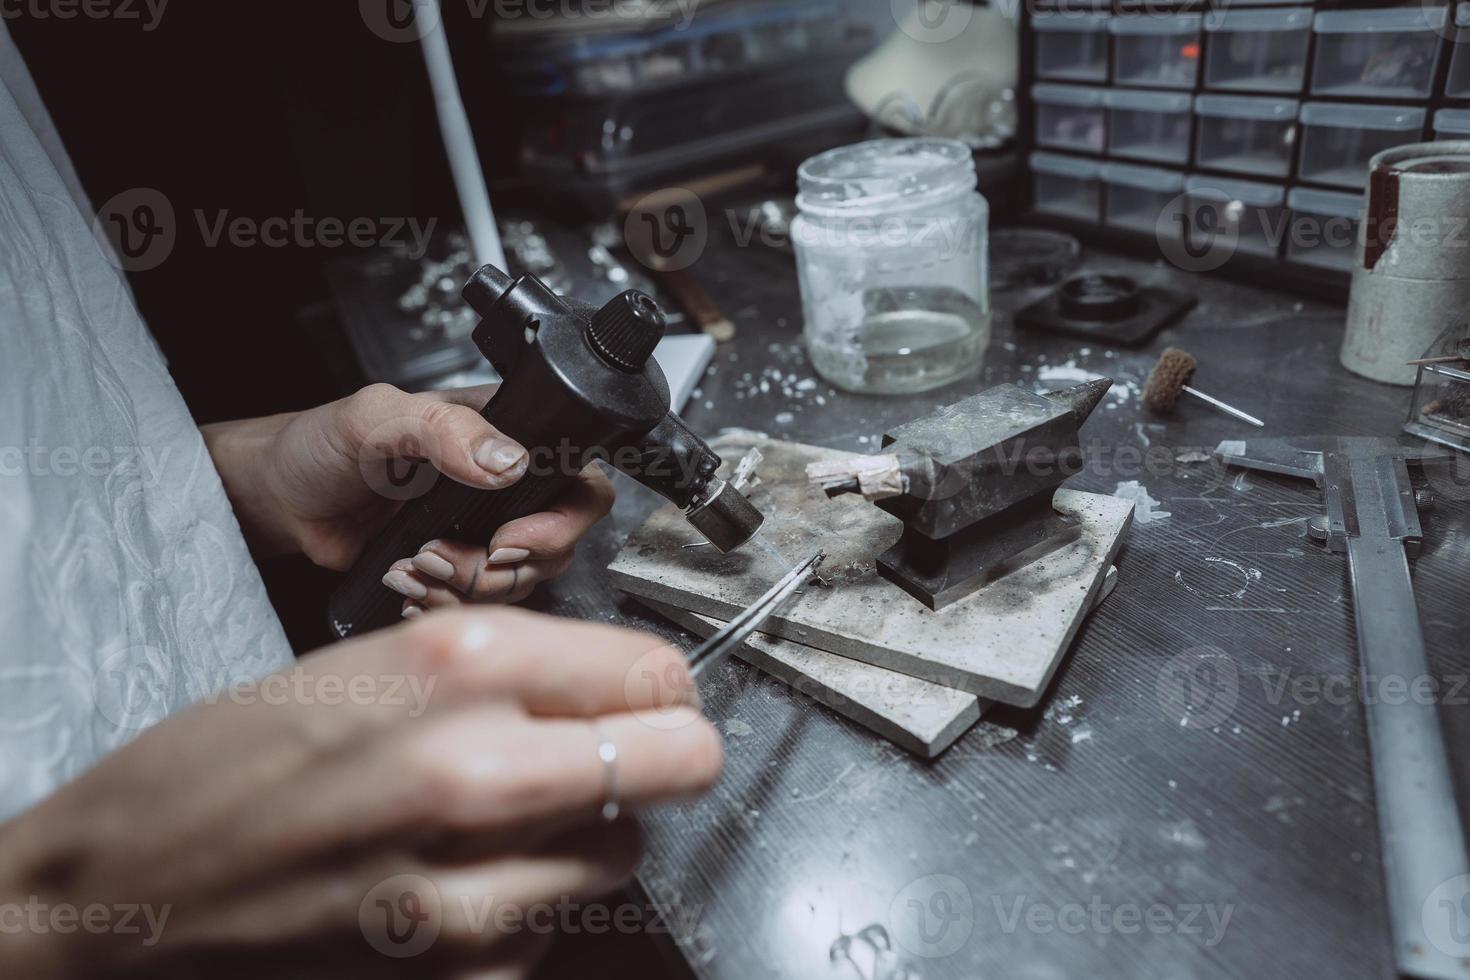 In the workshop, a woman jeweler is busy soldering jewelry photo